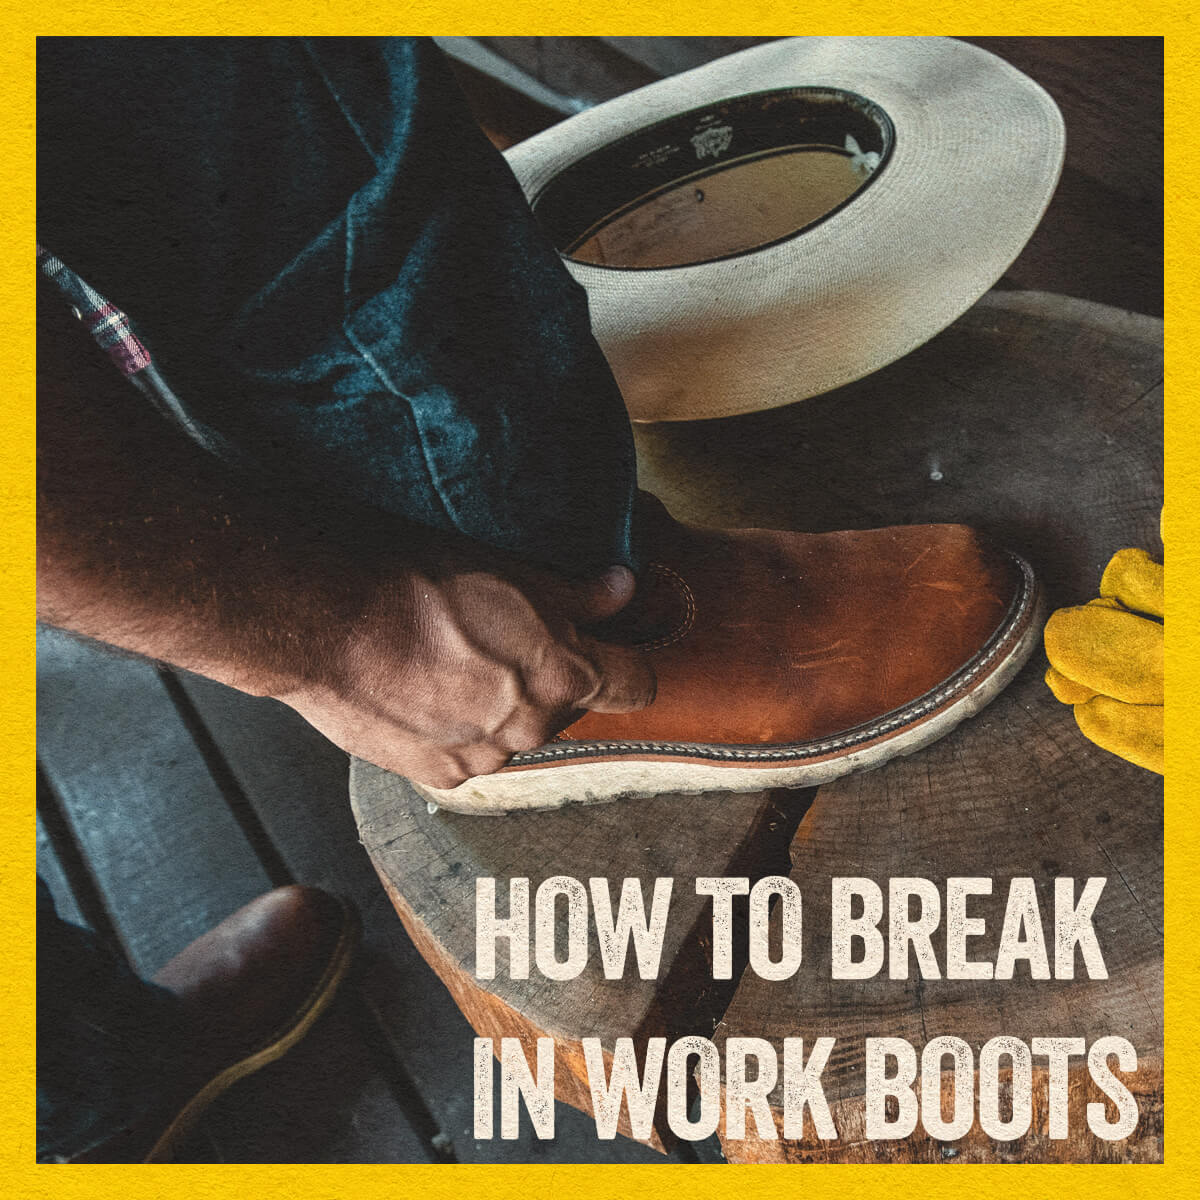 How To Wash Work Boots? Don'tHere's How You Clean Them